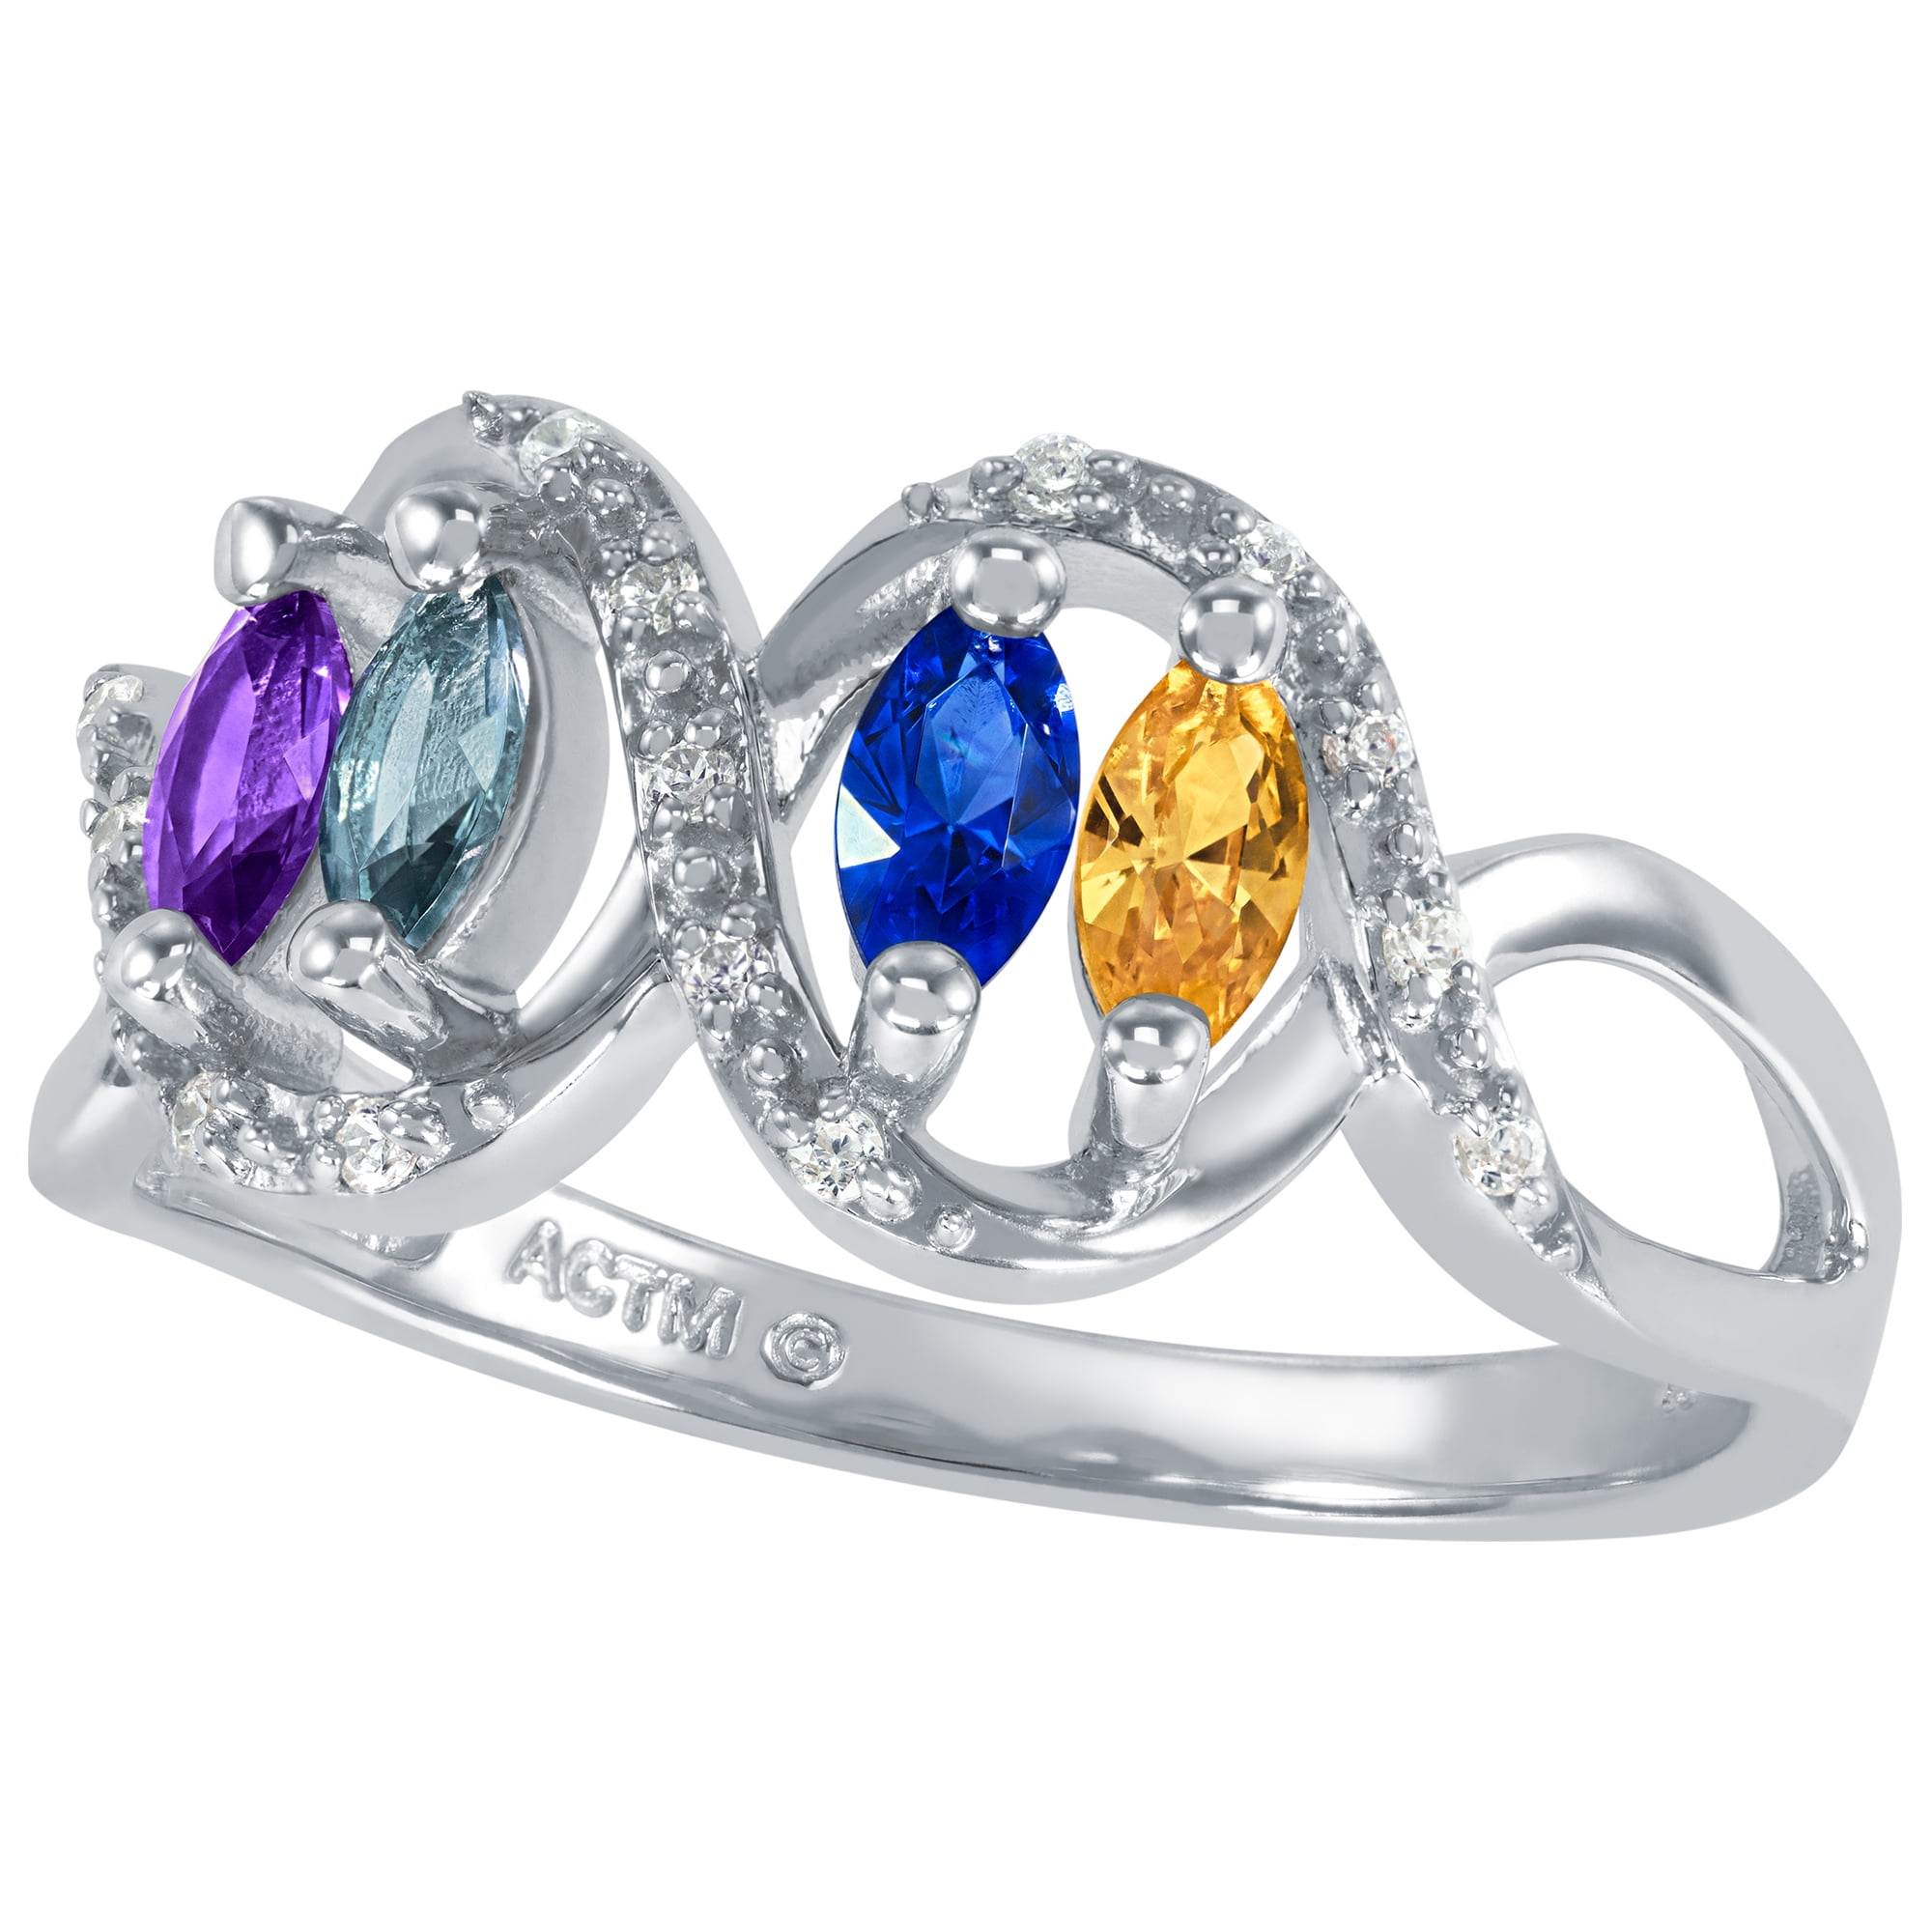 Keepsake Personalized Family Jewelry Simulated Birthstone Women's Larkspur Ring in 10K Yellow